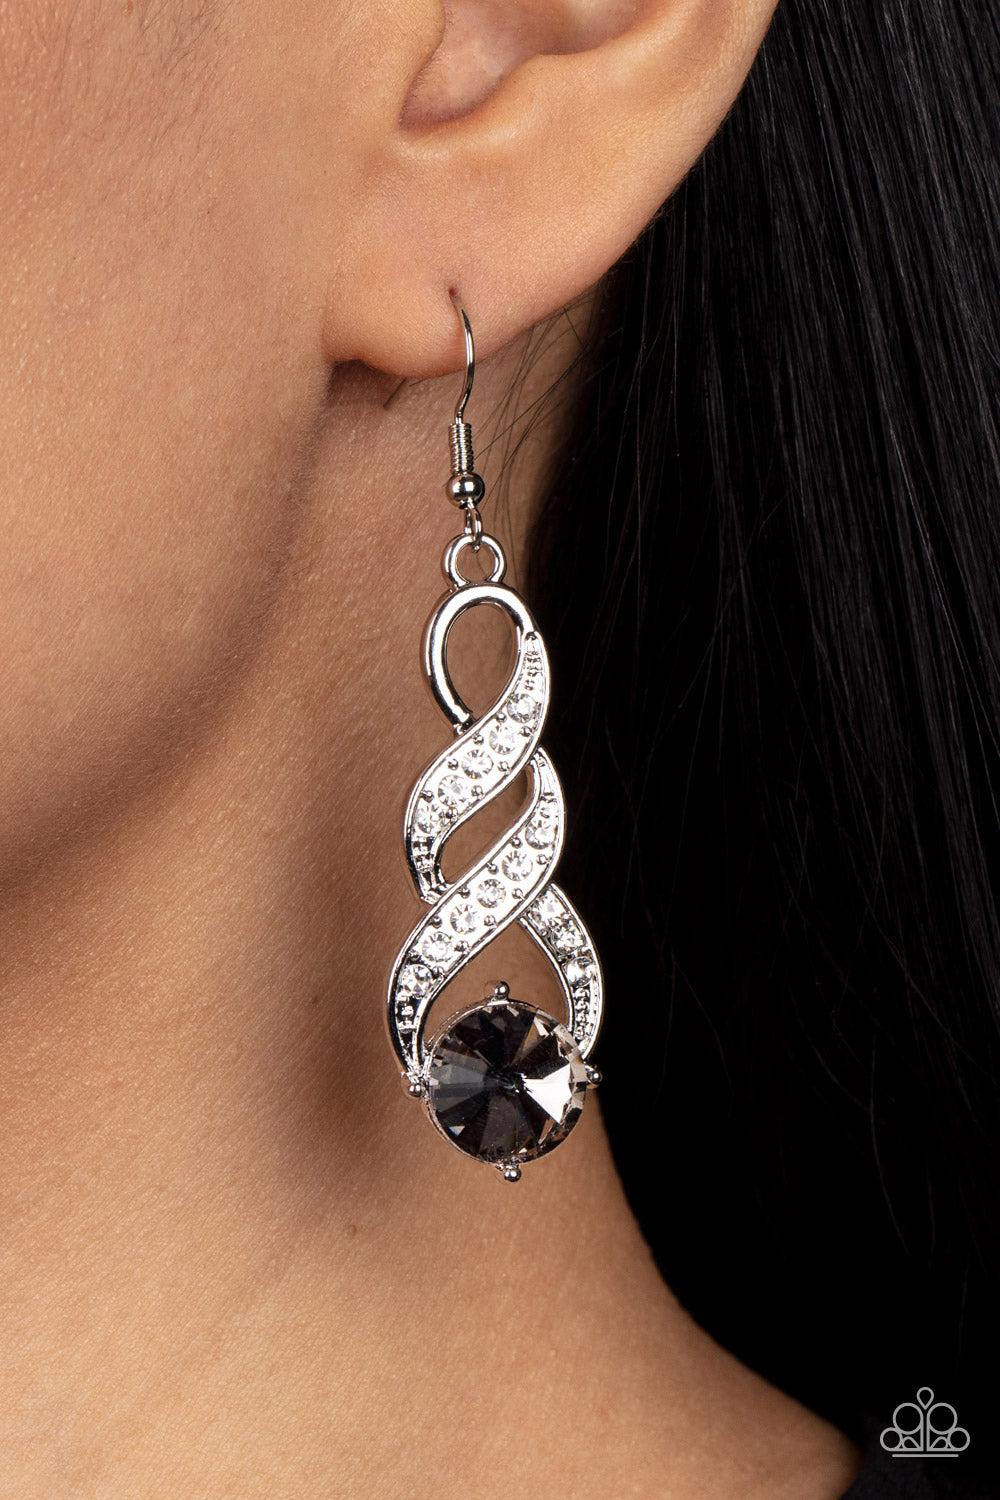 High-Ranking Royalty Silver Rhinestone Earrings - Paparazzi Accessories-on model - CarasShop.com - $5 Jewelry by Cara Jewels